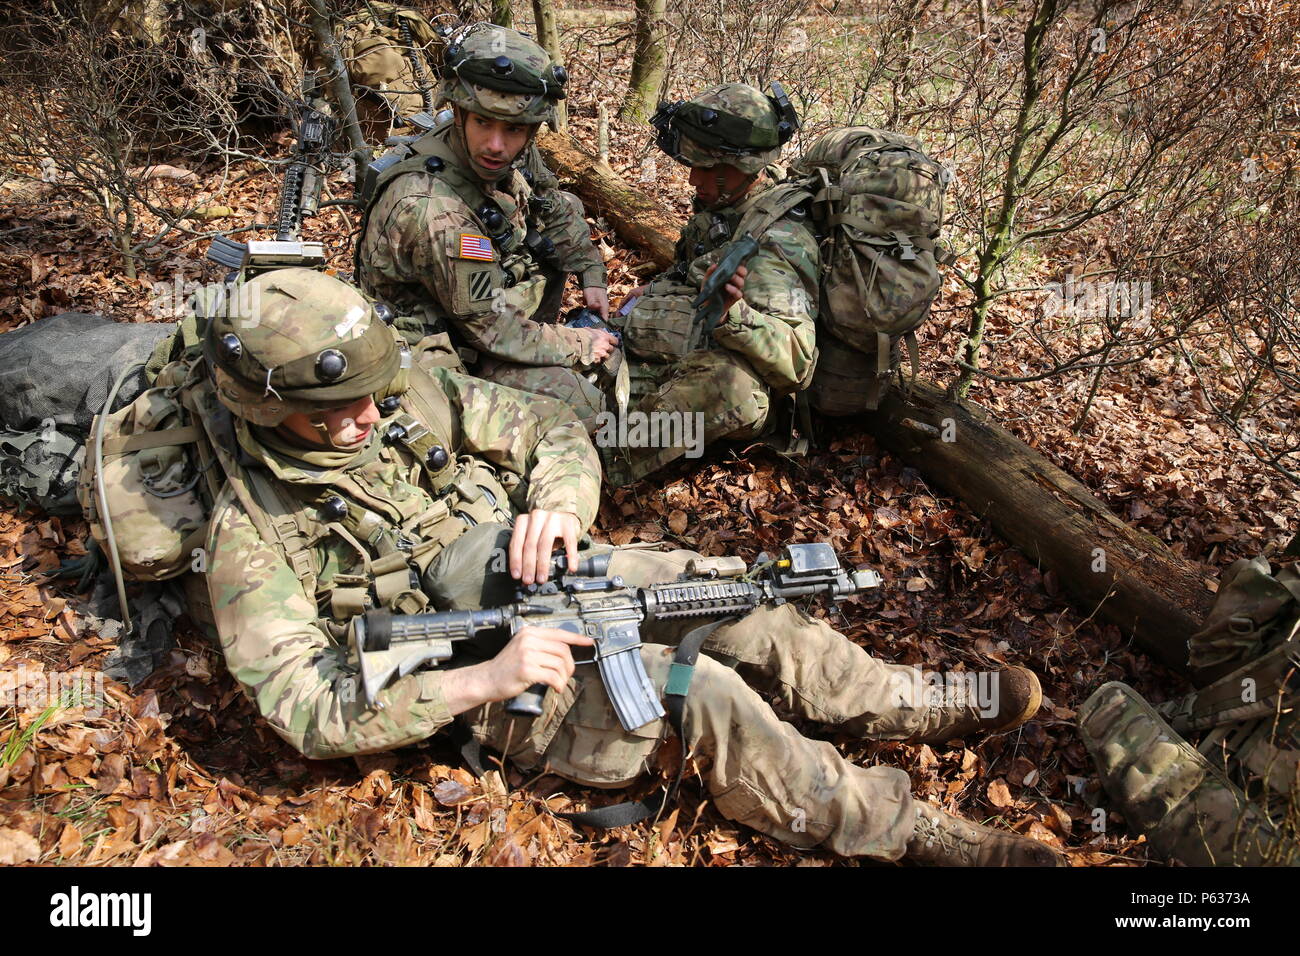 A U.S. Soldier, center, of Comanche Troop, 1st Squadron, 91st Cavalry Regiment, 173rd Airborne Brigade assess simulated casualties while reacting to contact during exercise Saber Junction 16 at the U.S. Army’s Joint Multinational Readiness Center (JMRC) in Hohenfels, Germany, April 14, 2016. Saber Junction 16 is the U.S. Army Europe’s 173rd Airborne Brigade’s combat training center certification exercise, taking place at the JMRC in Hohenfels, Germany, Mar. 31-Apr. 24, 2016.  The exercise is designed to evaluate the readiness of the Army’s Europe-based combat brigades to conduct unified land o Stock Photo